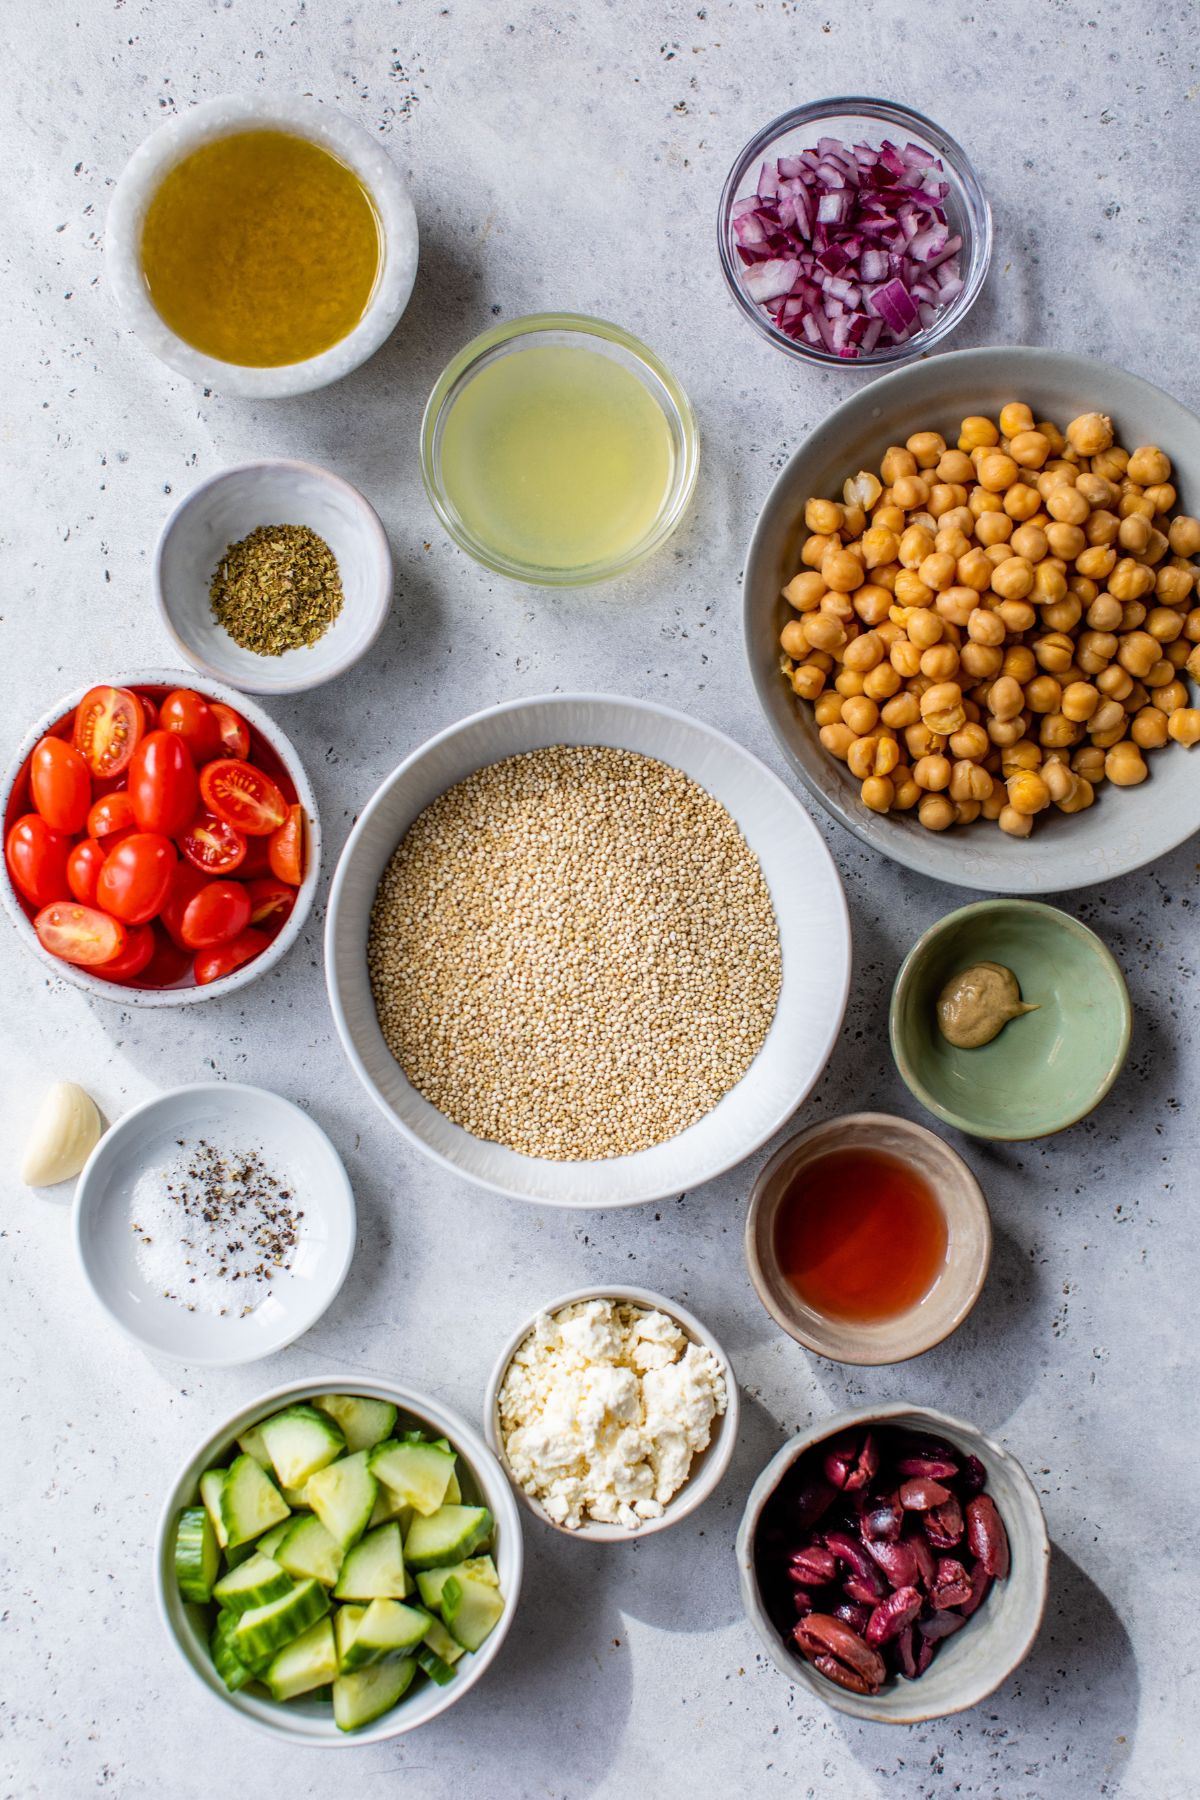 Ingredients for making a Greek Quinoa Salad divided into small bowls.